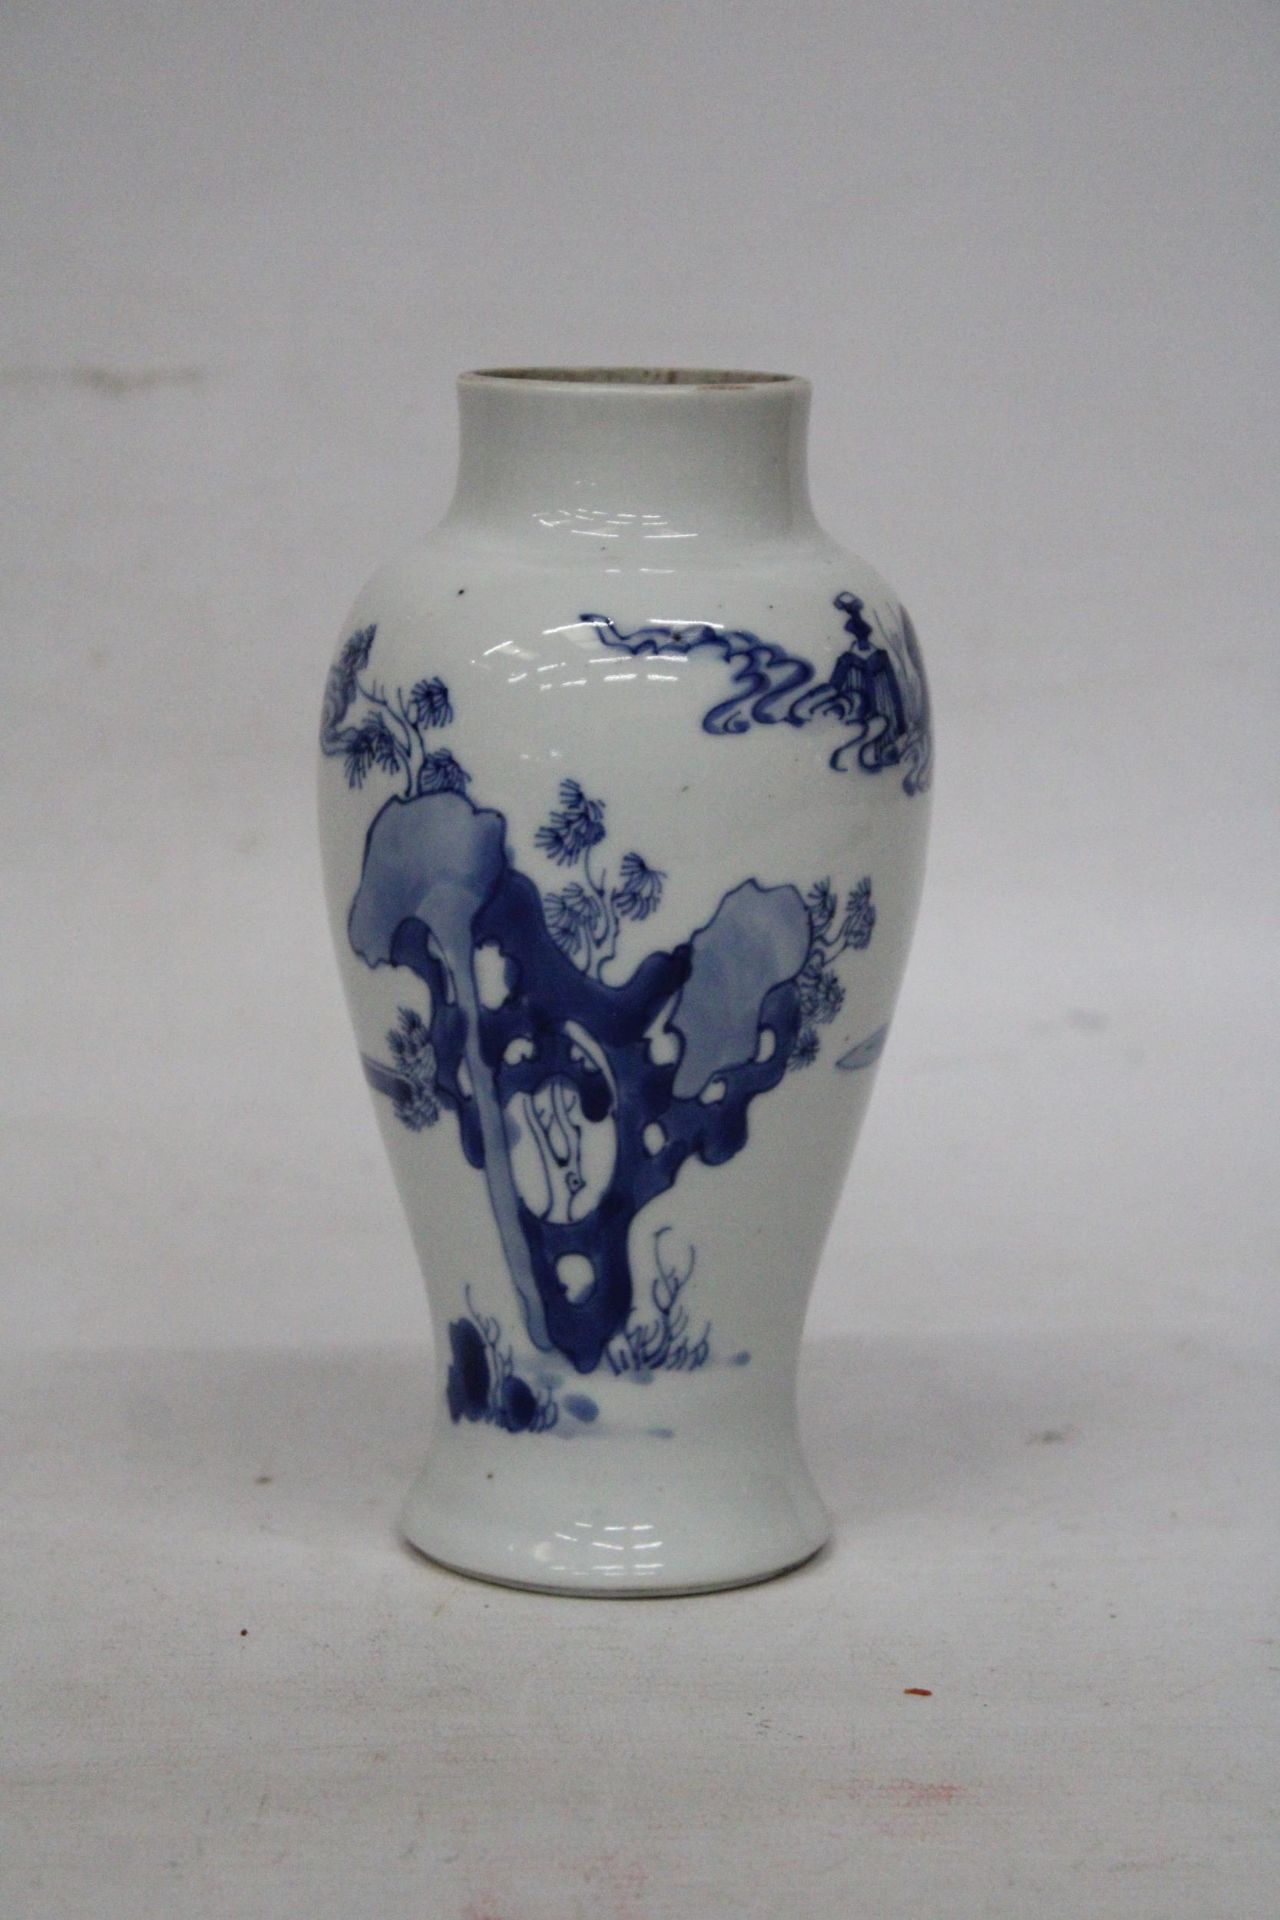 A CHINESE KANGXI PERIOD (1661 - 1722) BLUE AND WHITE PORCELAIN VASE HEIGHT 19CM - Image 2 of 7